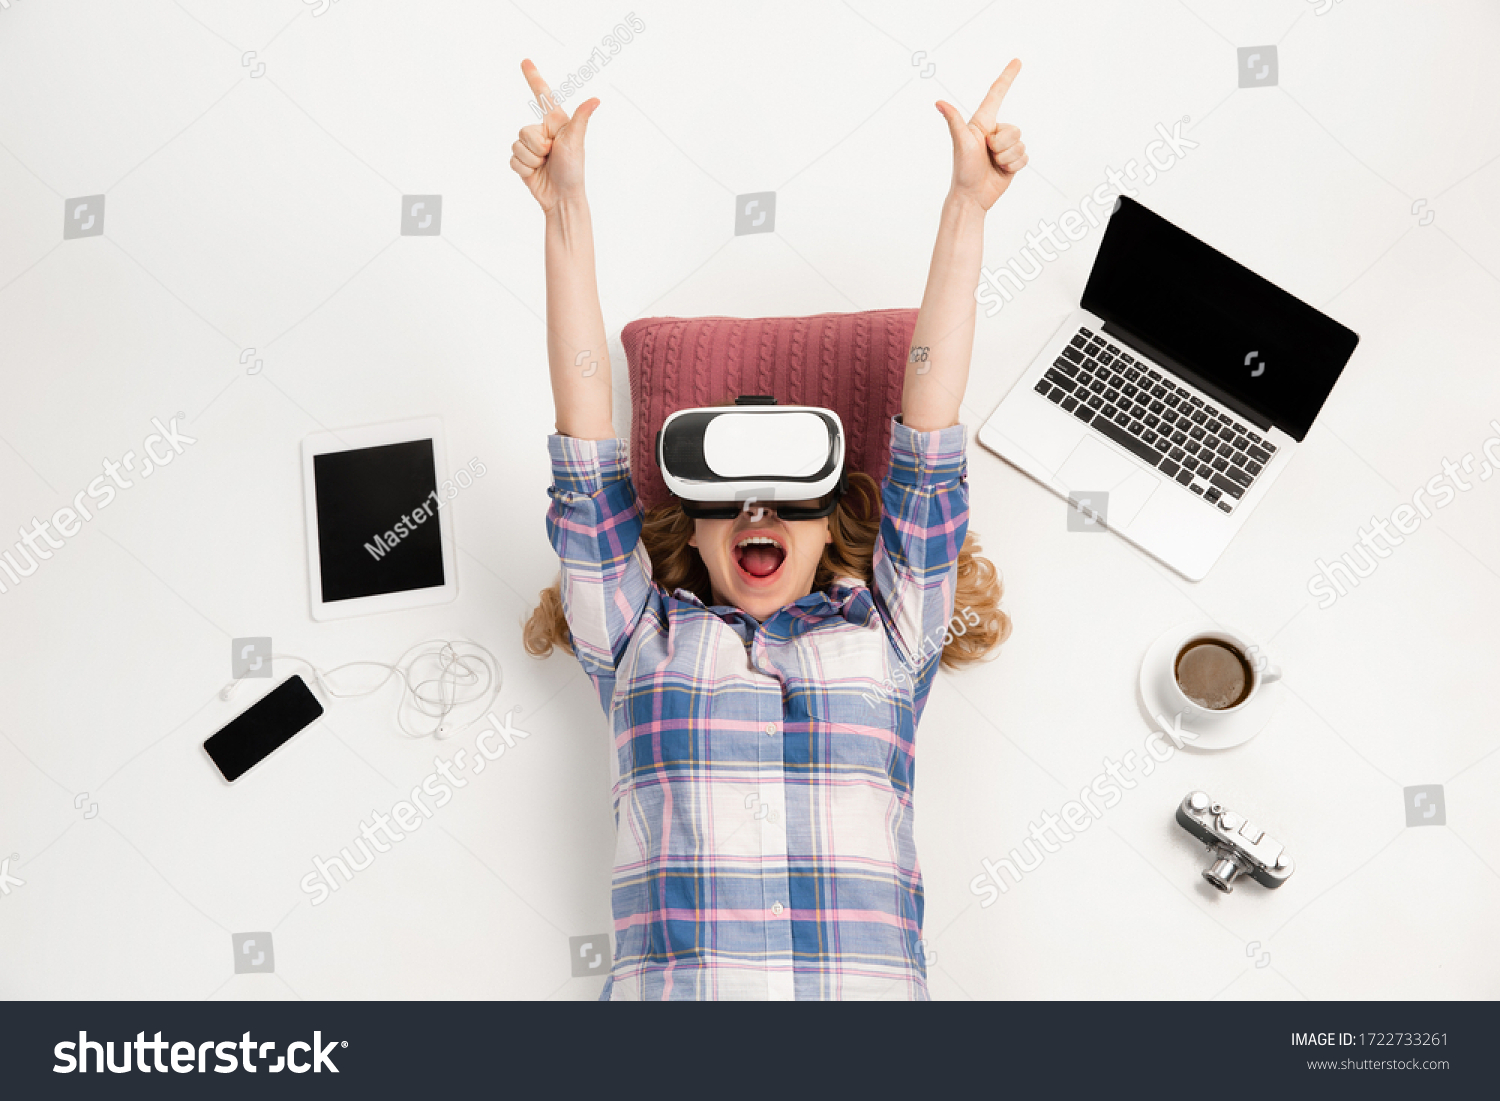 Young caucasian woman using devices, gadgets isolated on white studio background. Concept of modern technologies, gadgets, tech, emotions, ad. Copyspace. Gaming, shopping, meeting online education. #1722733261